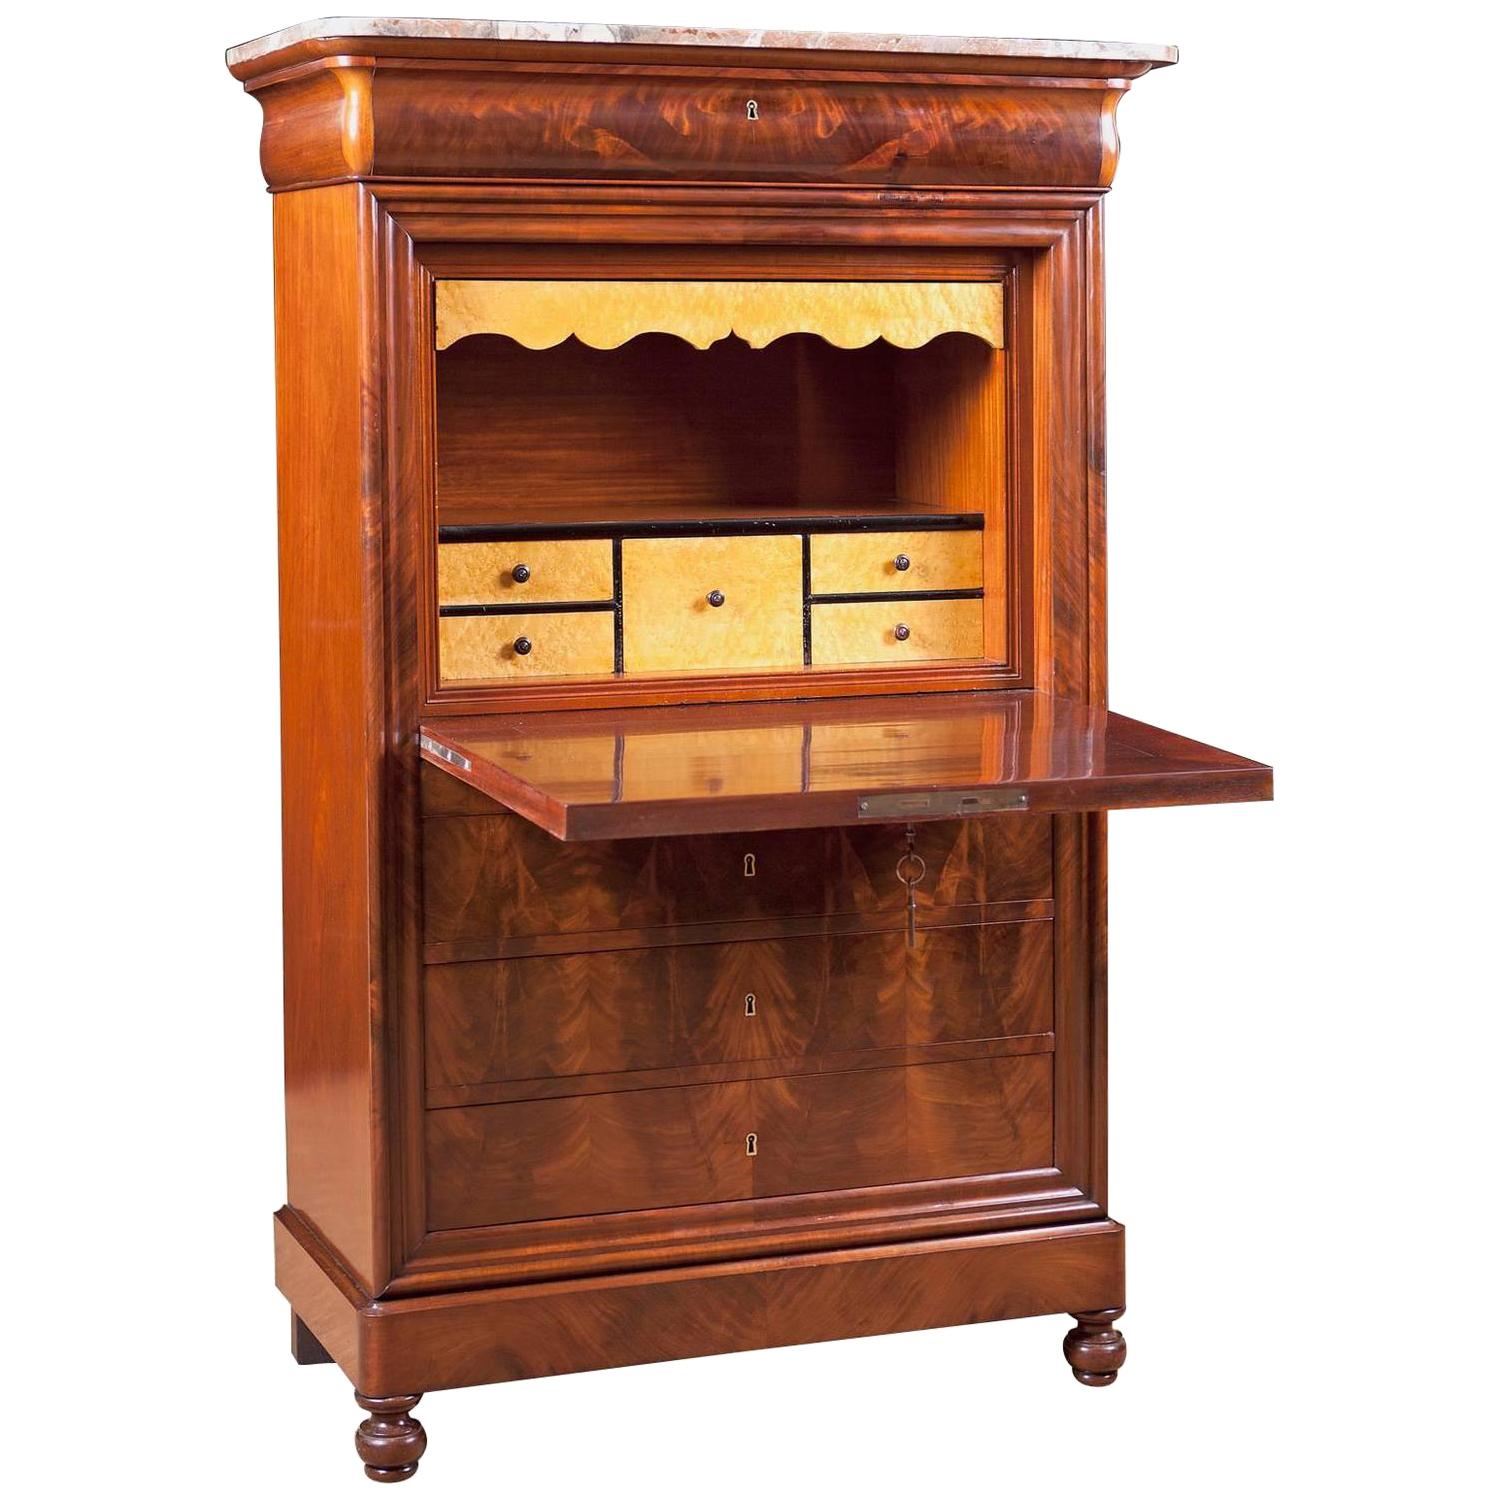 Antique French Louis Philippe Fall-Front Secretary in Mahogany, circa 1835